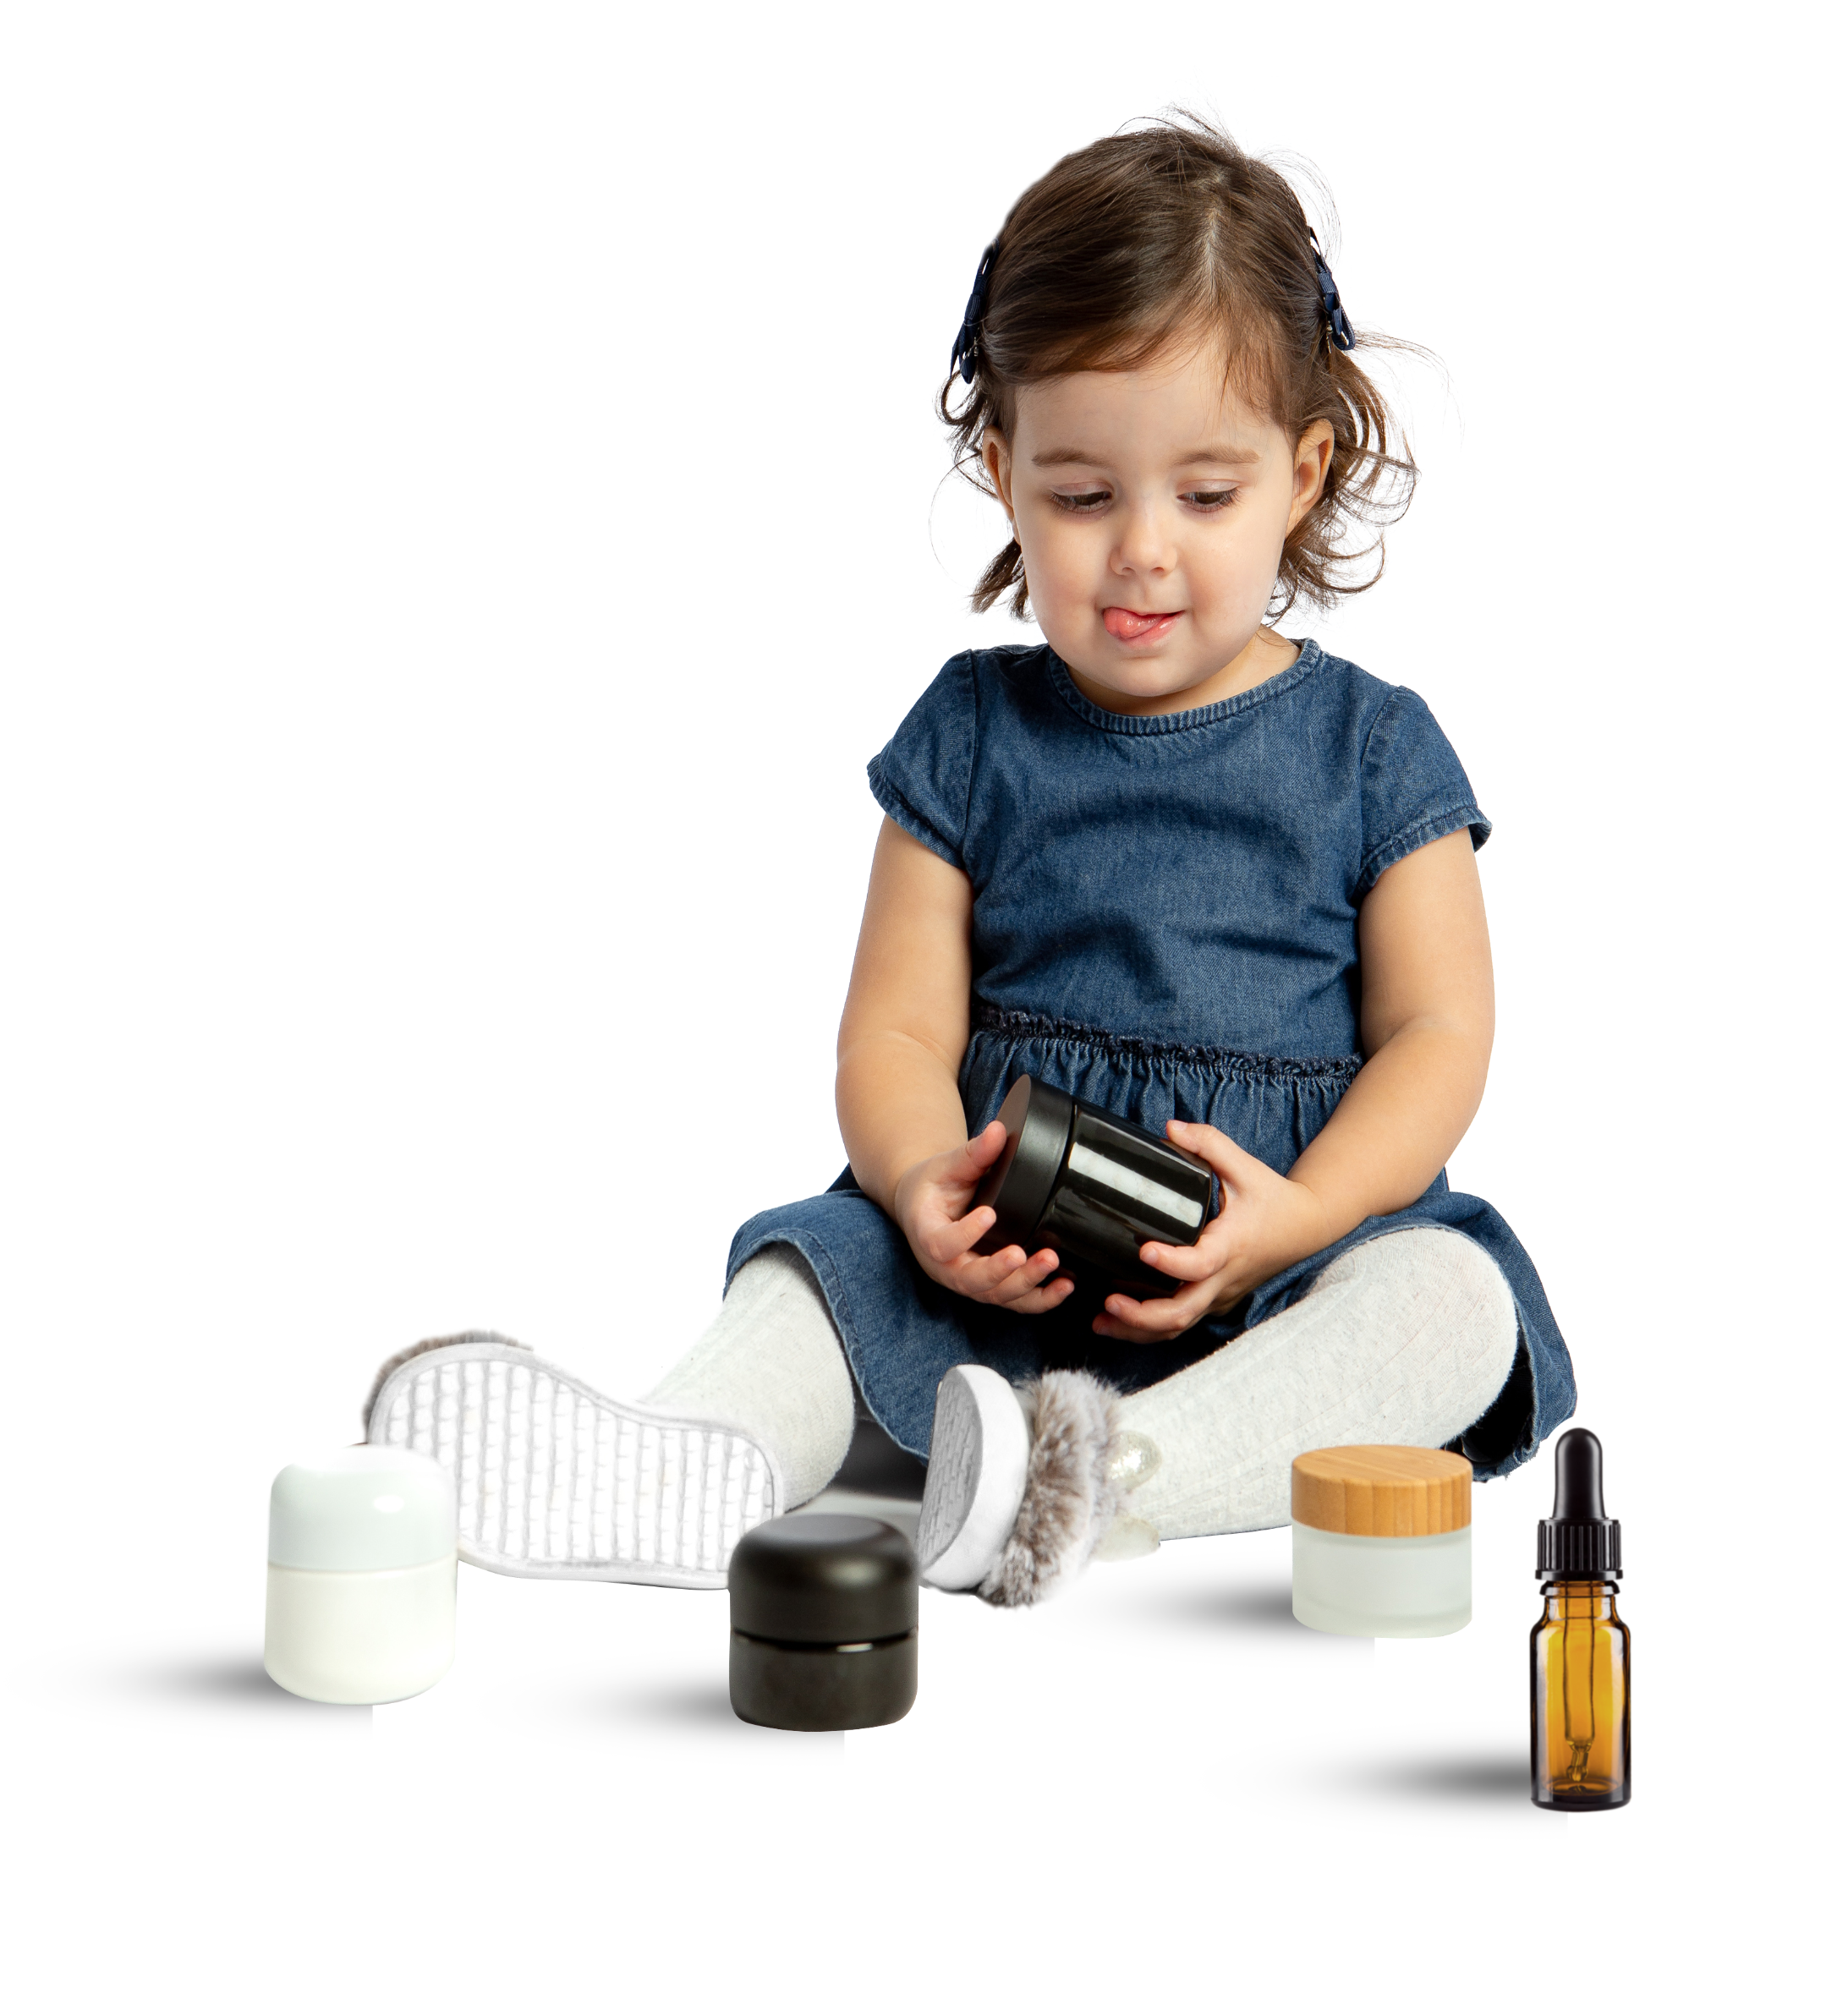 Child-Resistant Packaging: The new challenges facing the industry